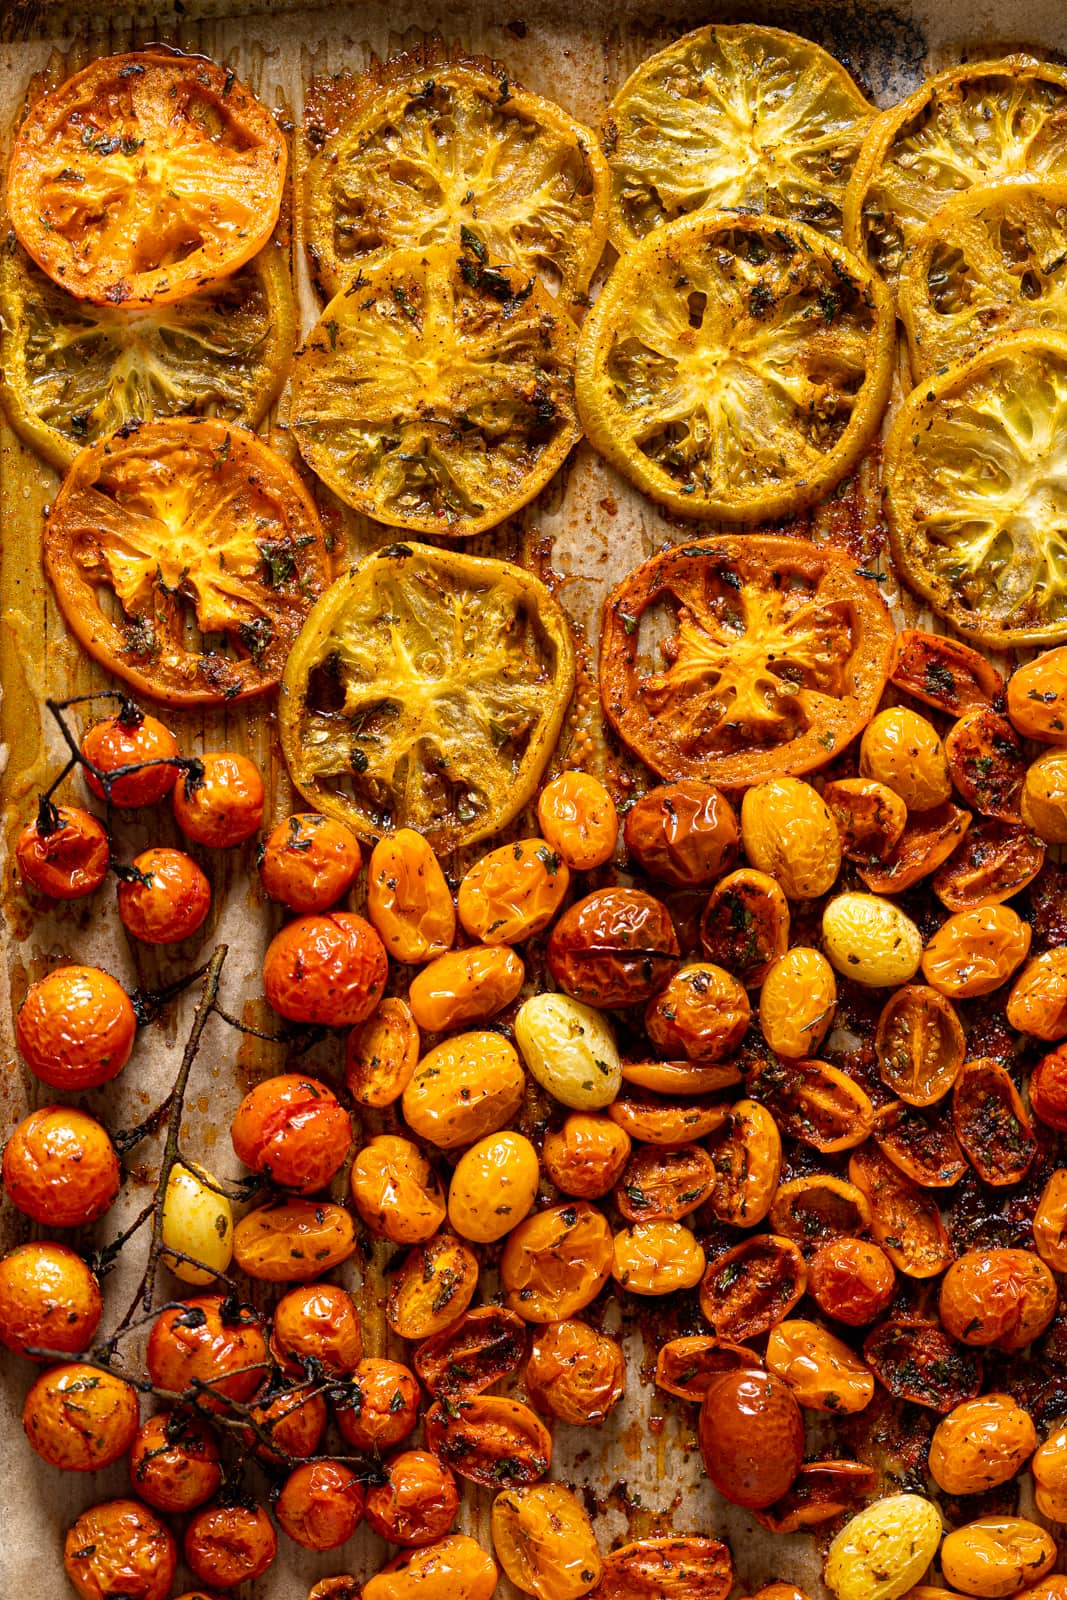 Baking sheet full of various types of roasted tomatoes